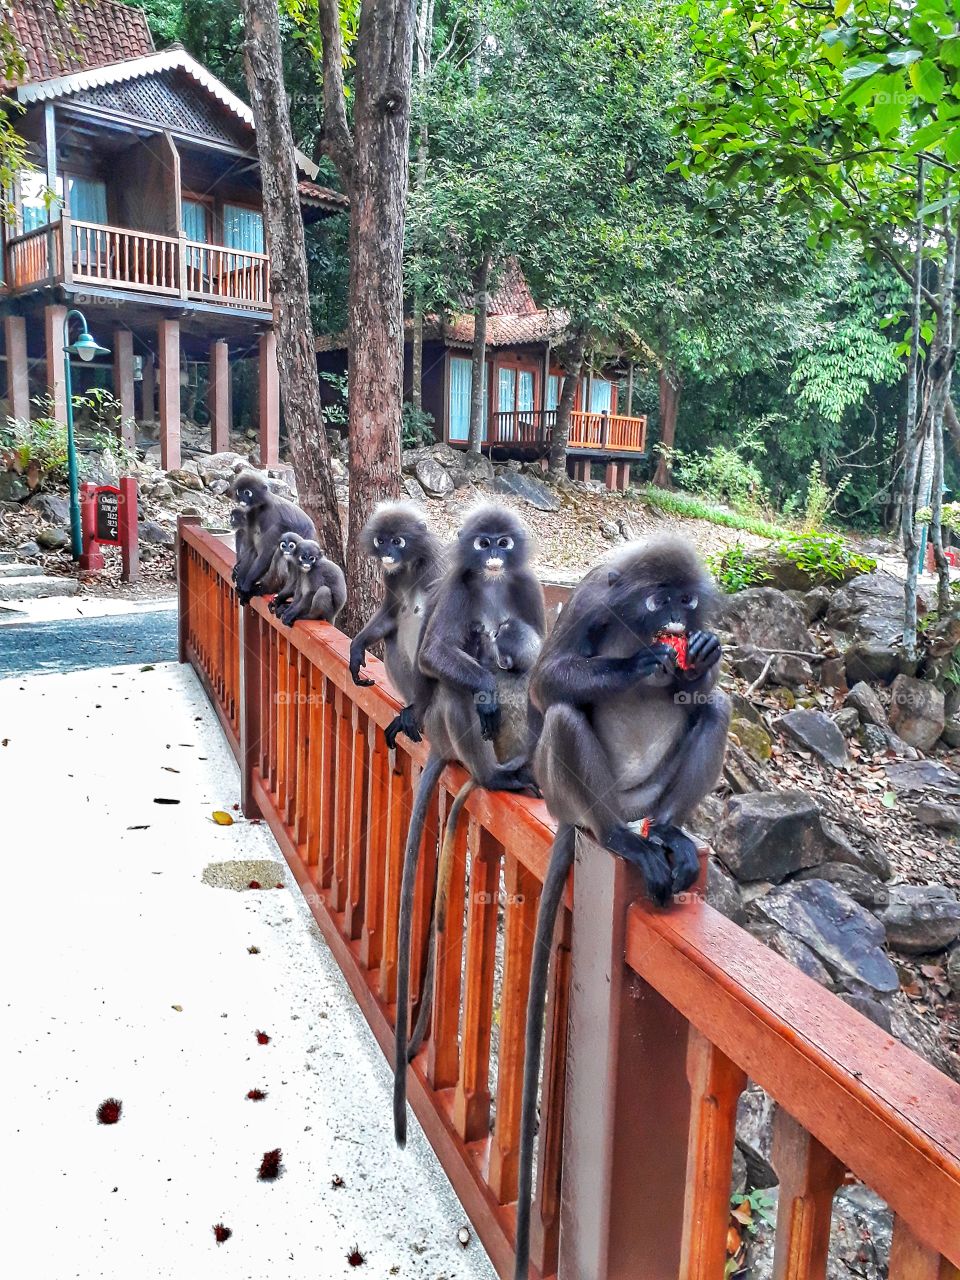 Dusty Leaf Monkey that almost extinct, they are very cute and like to travel in group. In front is the leader, if he eats other won't dare to take the food and will follow him every where.
Location in: Malaysia.
Photo taken using Samsung phone.